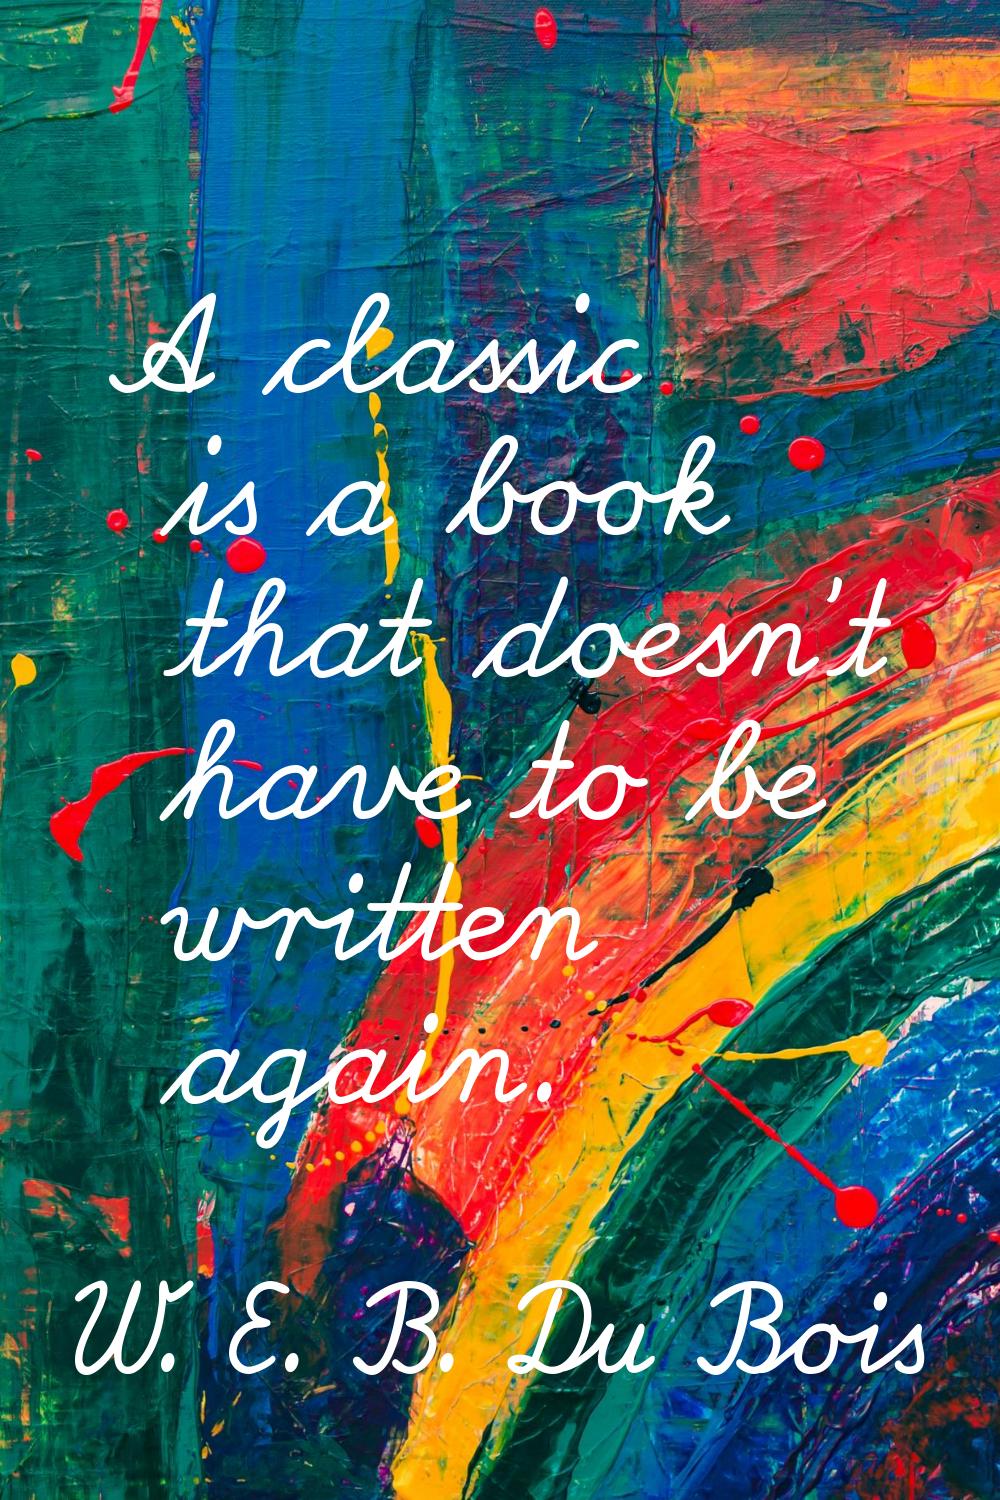 A classic is a book that doesn't have to be written again.